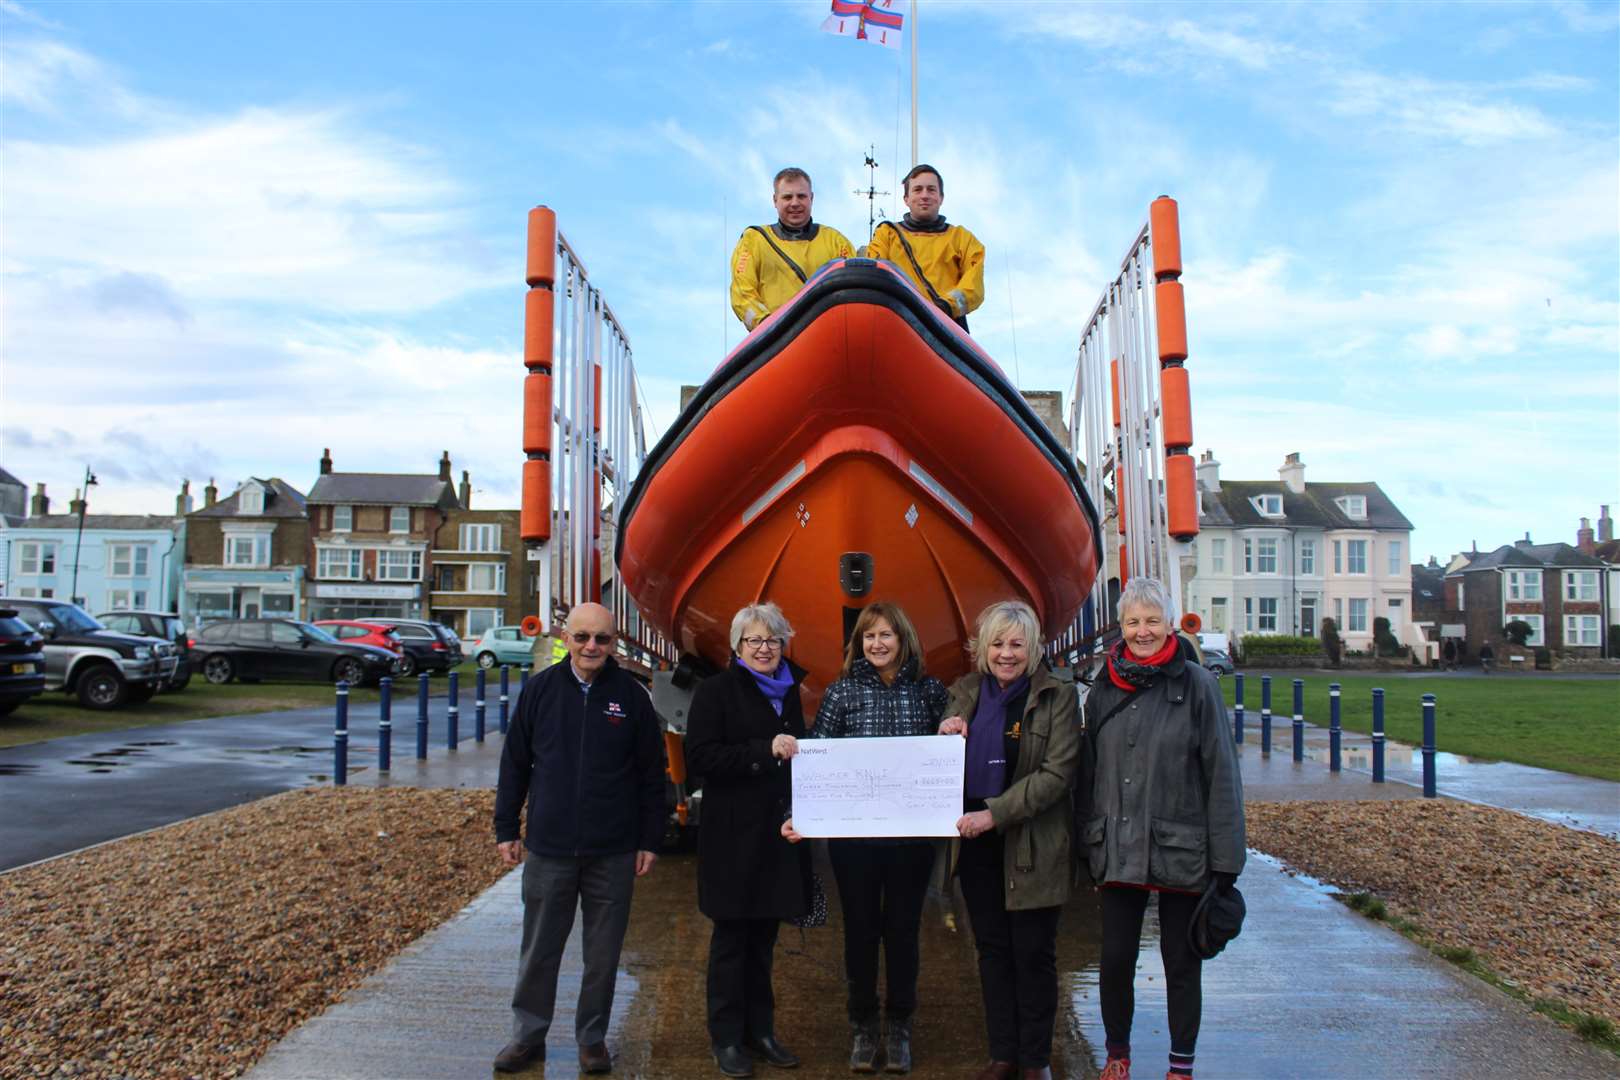 Players from Princes Ladies Golf Club present a cheque to Walmer RNLI